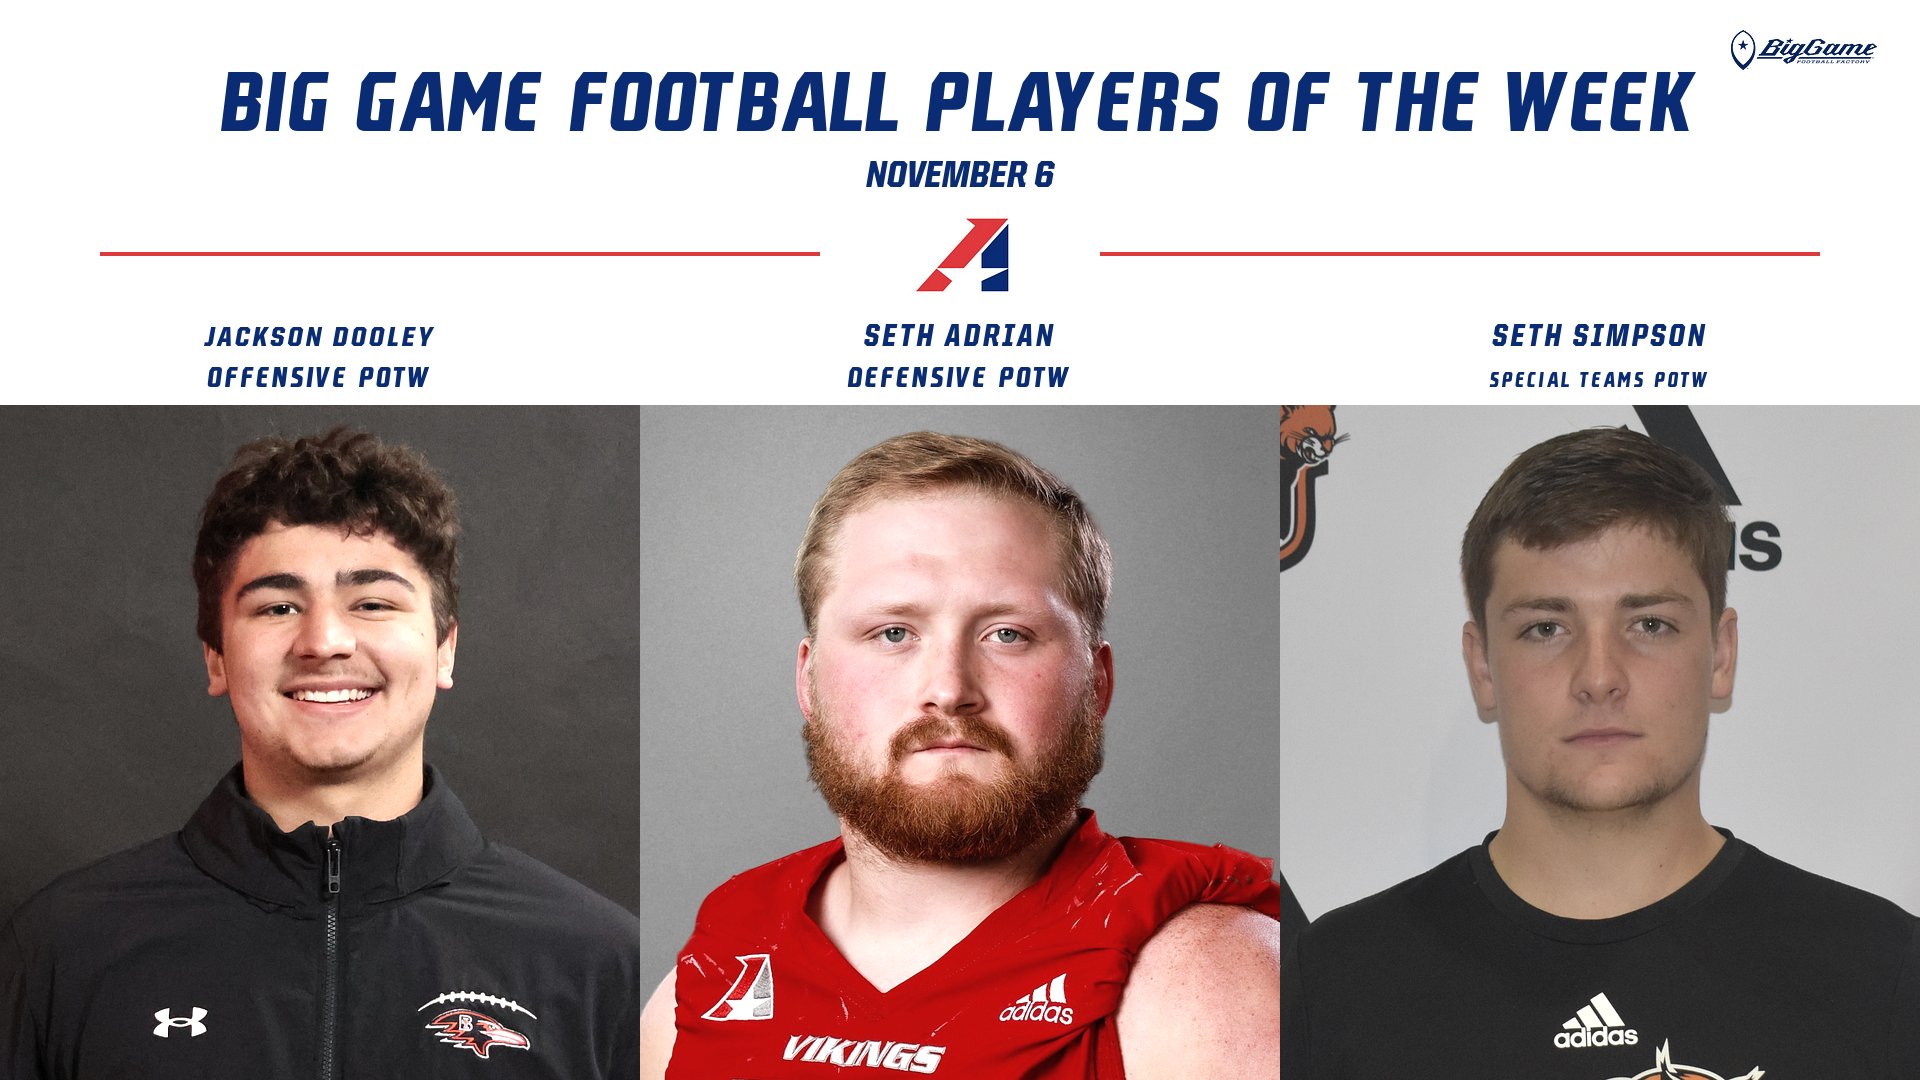 Dooley, Adrian, Simpson Collect Big Game Football Player of the Week Awards on November 6